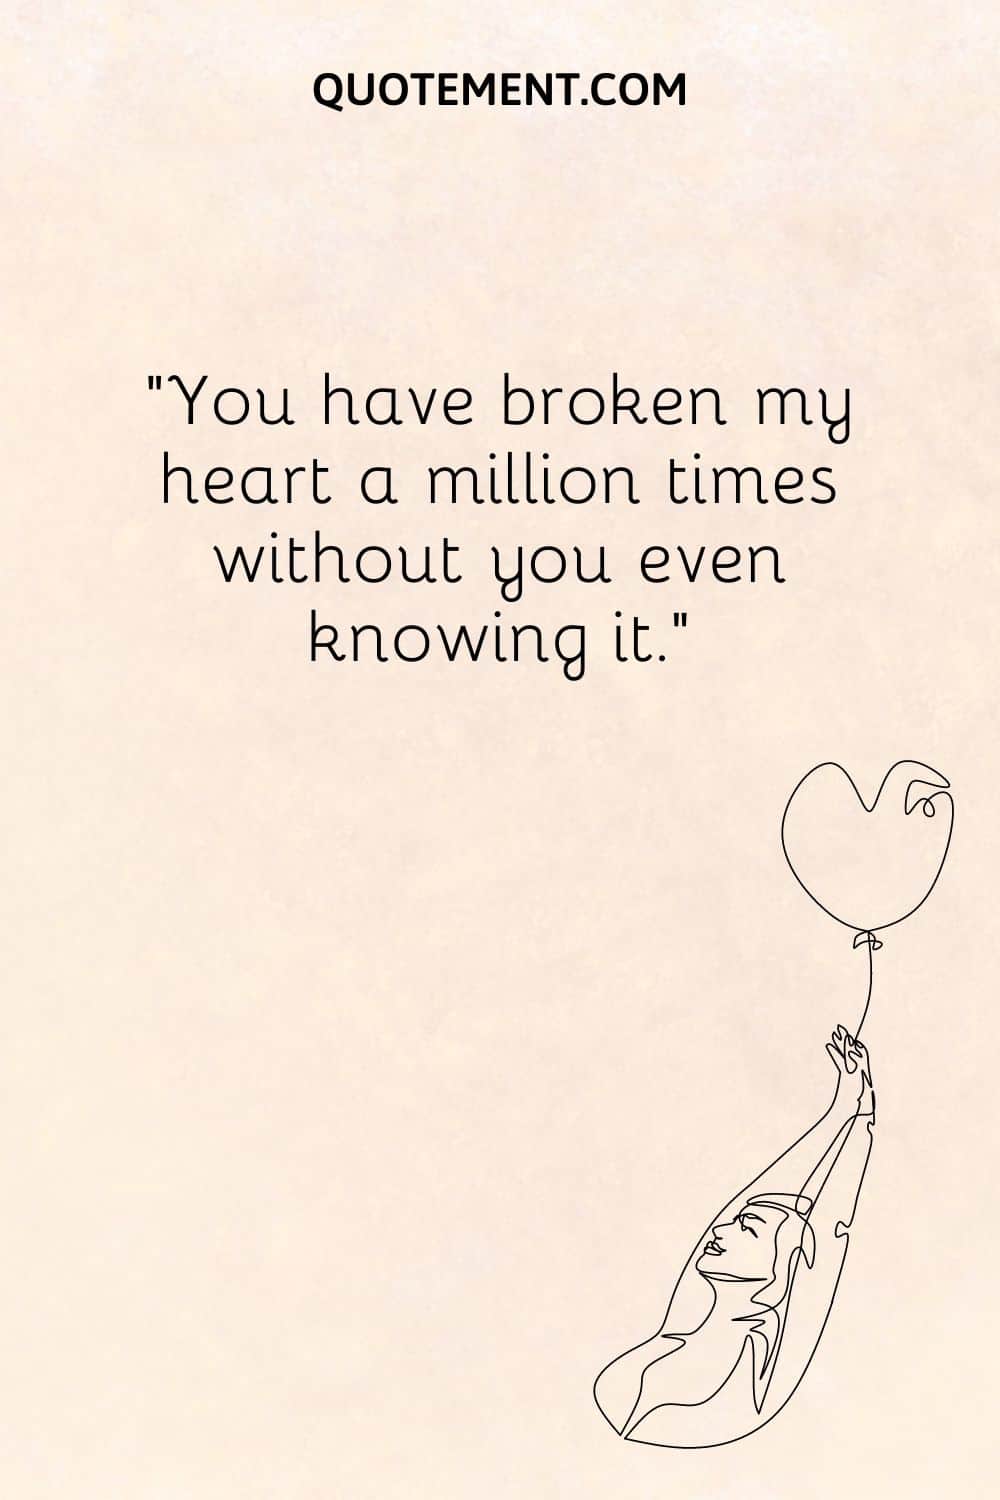 You have broken my heart a million times without you even knowing it.